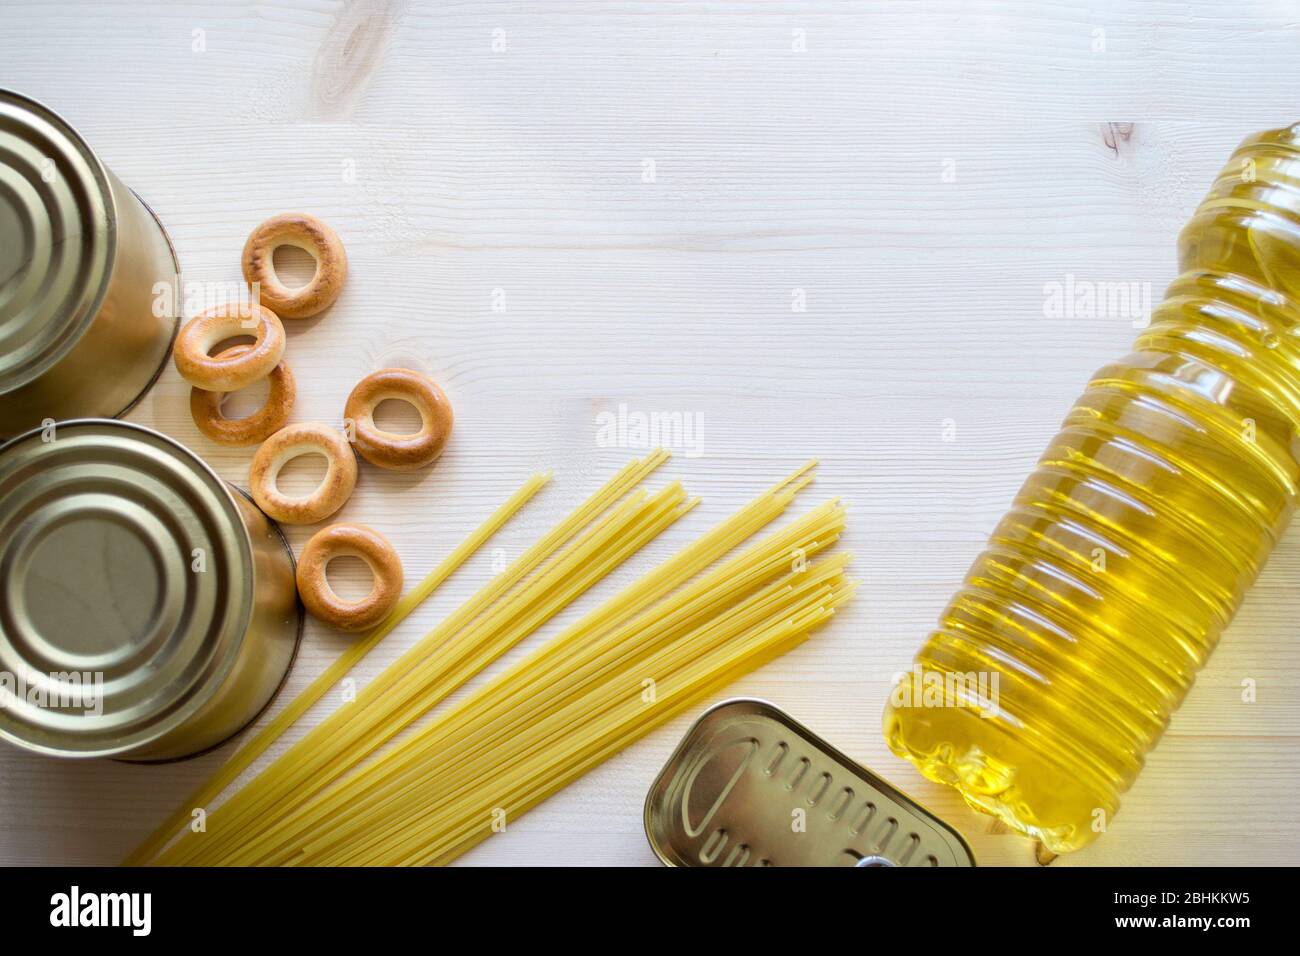 Food supplies, crisis food stock for quarantine isolation period on a bright wooden background. Pasta, oil, canned food, bagels. Stock Photo